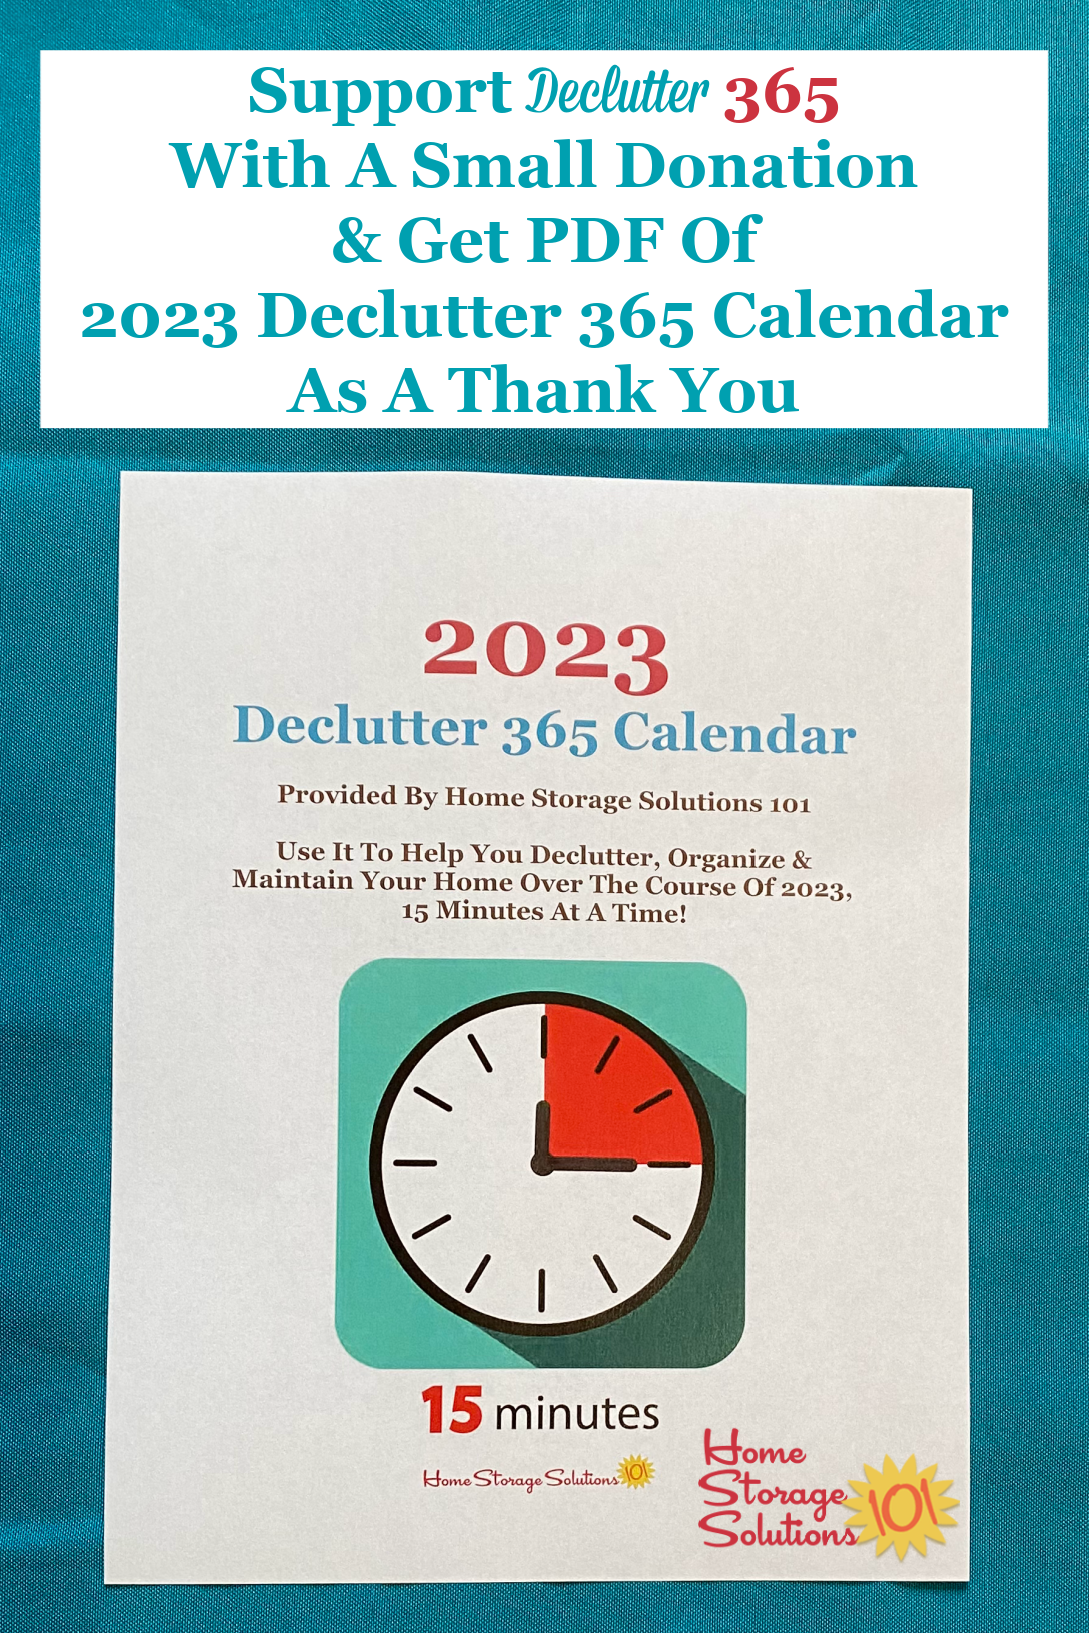 Support Declutter 365 with a small donation and get a PDF of the 2023 Declutter 365 calendar as a thank you {on Home Storage Solutions 101} #Declutter365 #DeclutterHome #DeclutteringTips